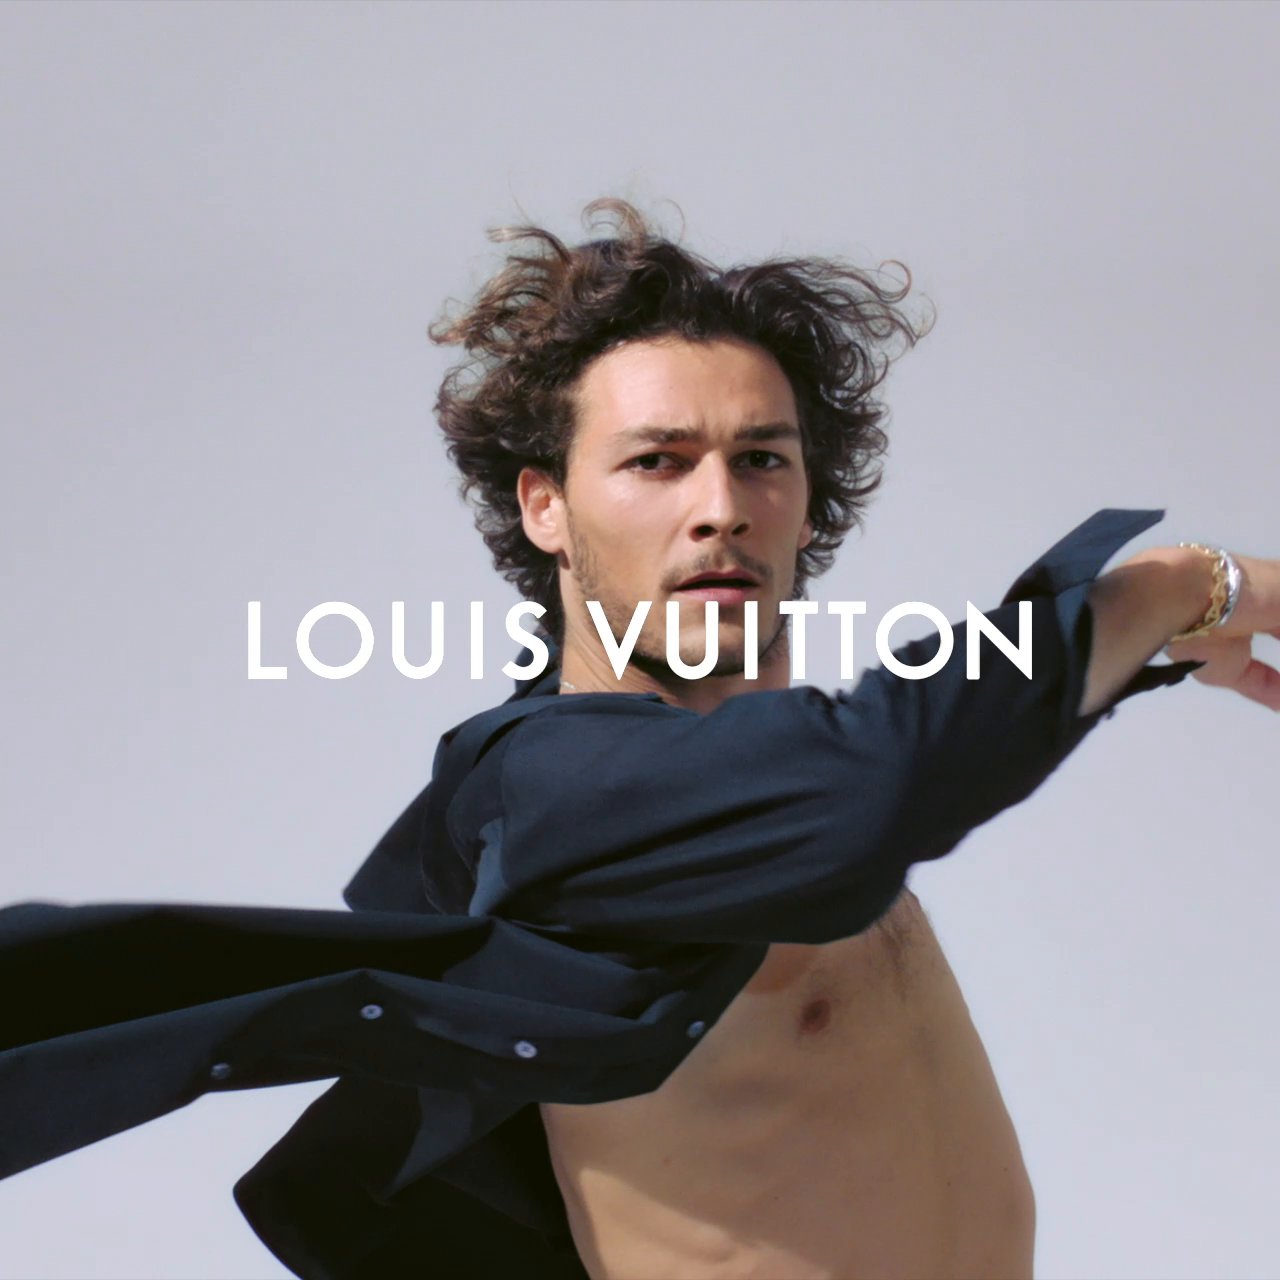 Louis Vuitton on X: The movement of #HugoMarchand. The French